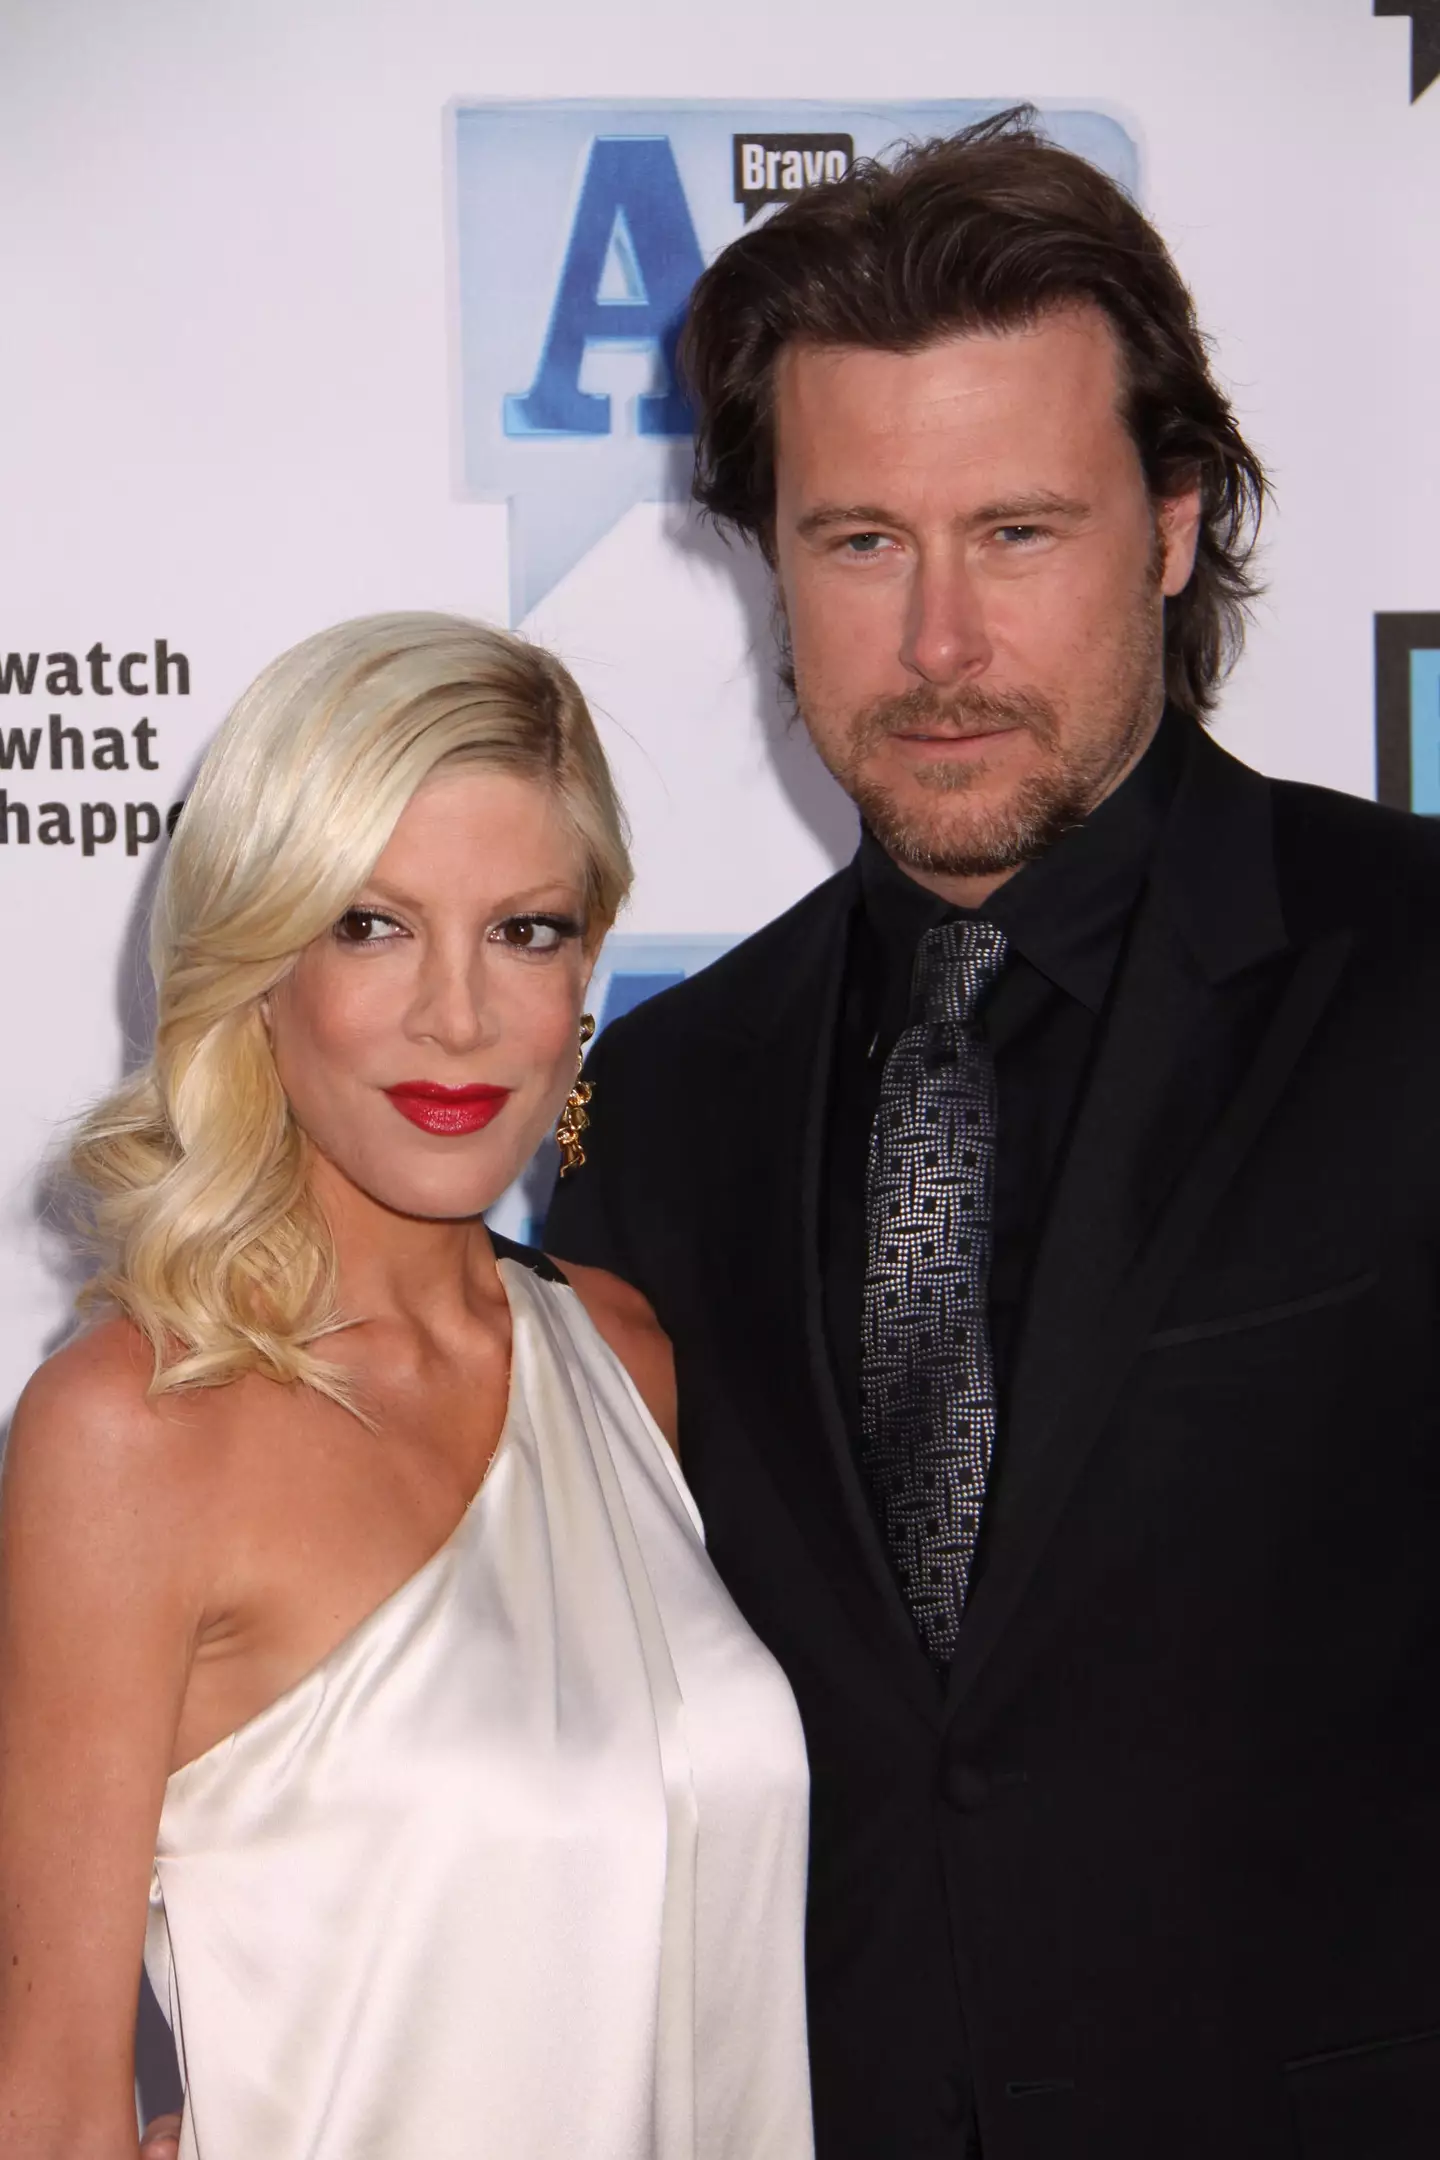 Tori Spelling and Dean McDermott have announced their separation.